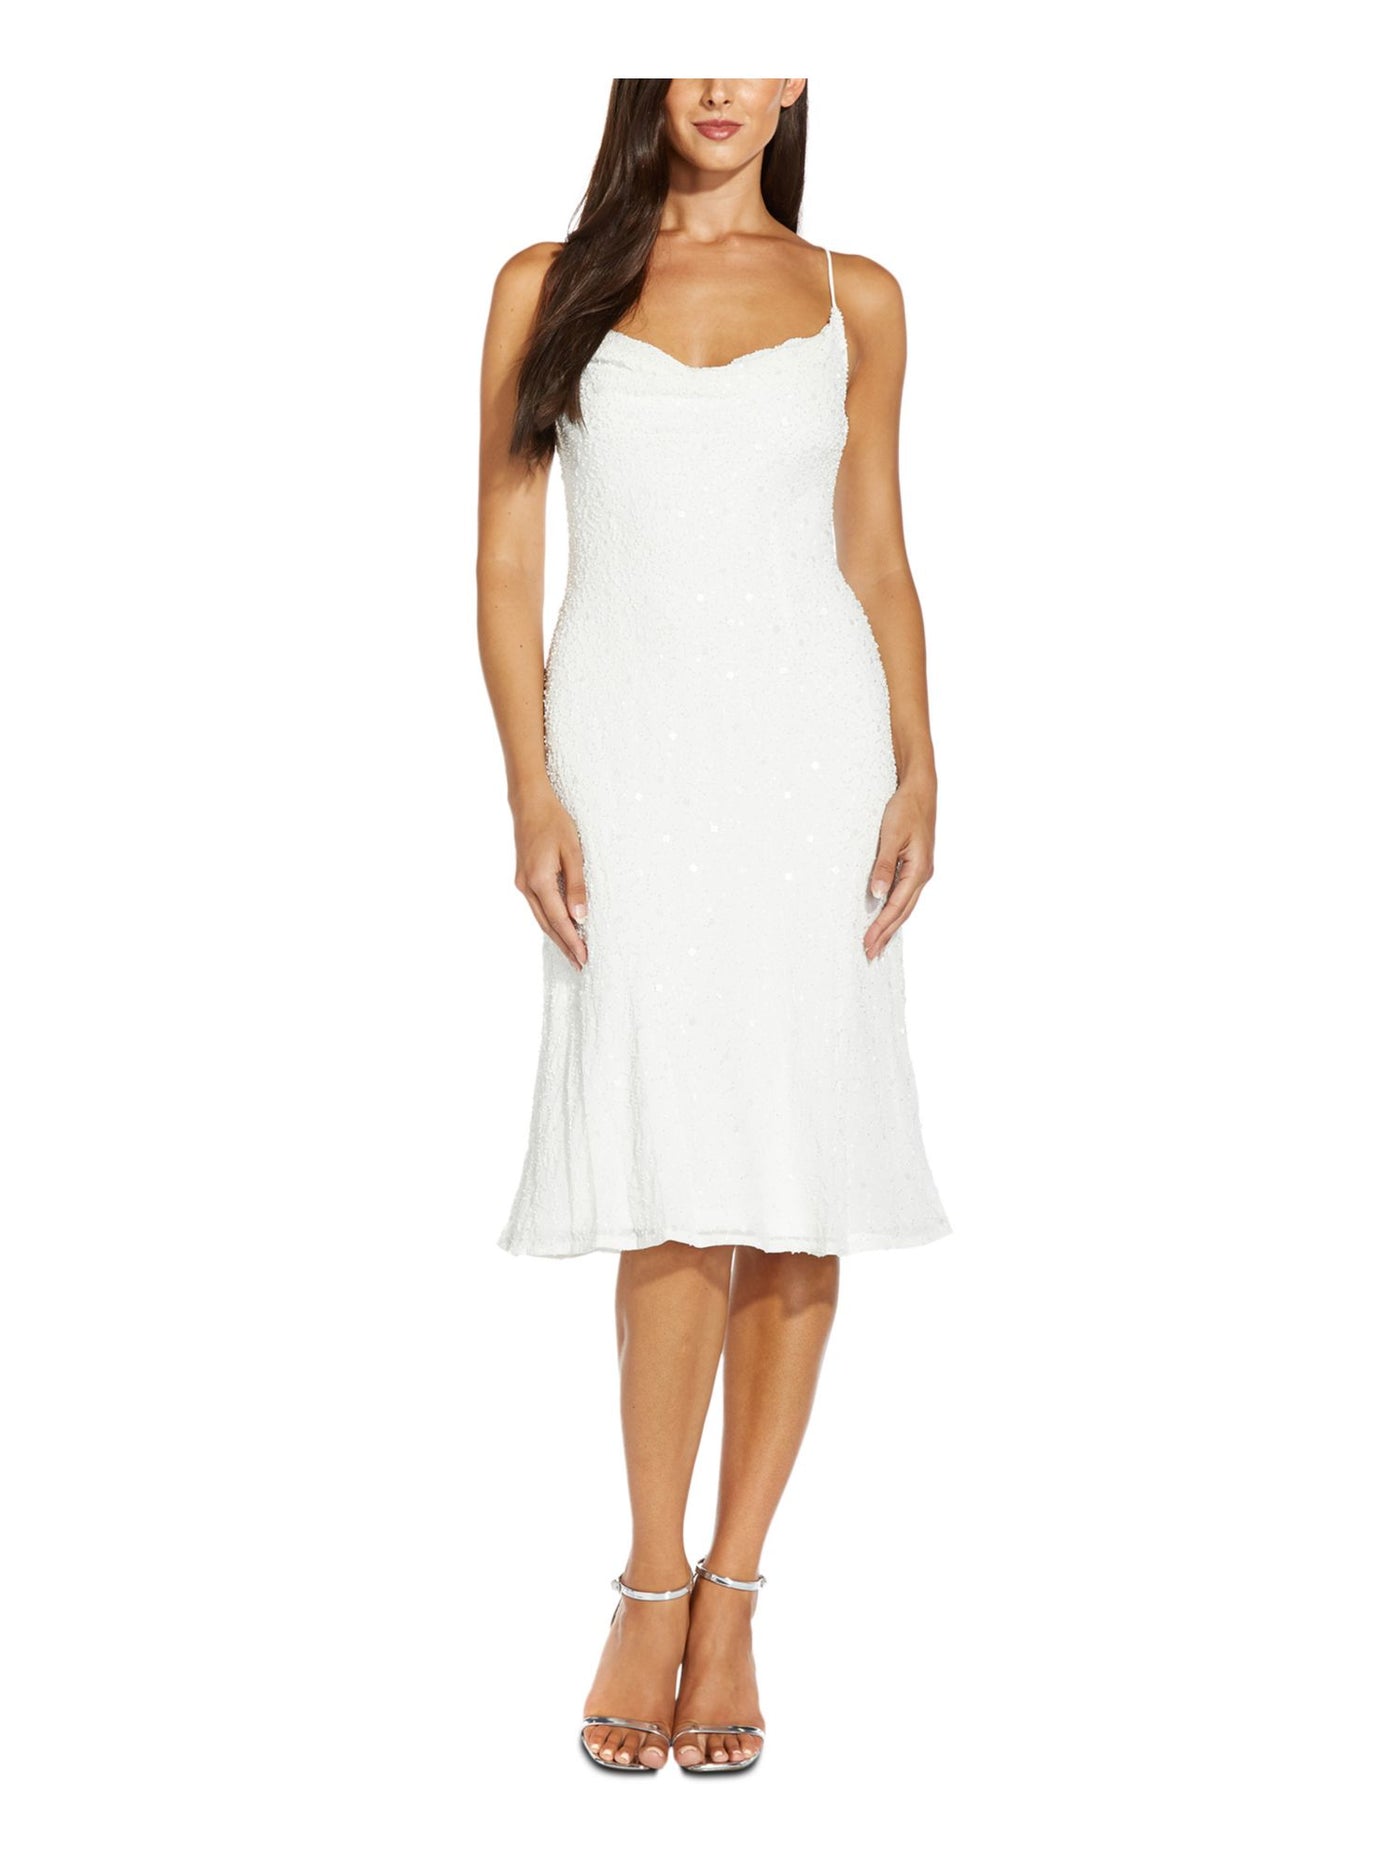 ADRIANNA PAPELL Womens White Beaded Zippered Spaghetti Strap Cowl Neck Knee Length Evening Fit + Flare Dress 2